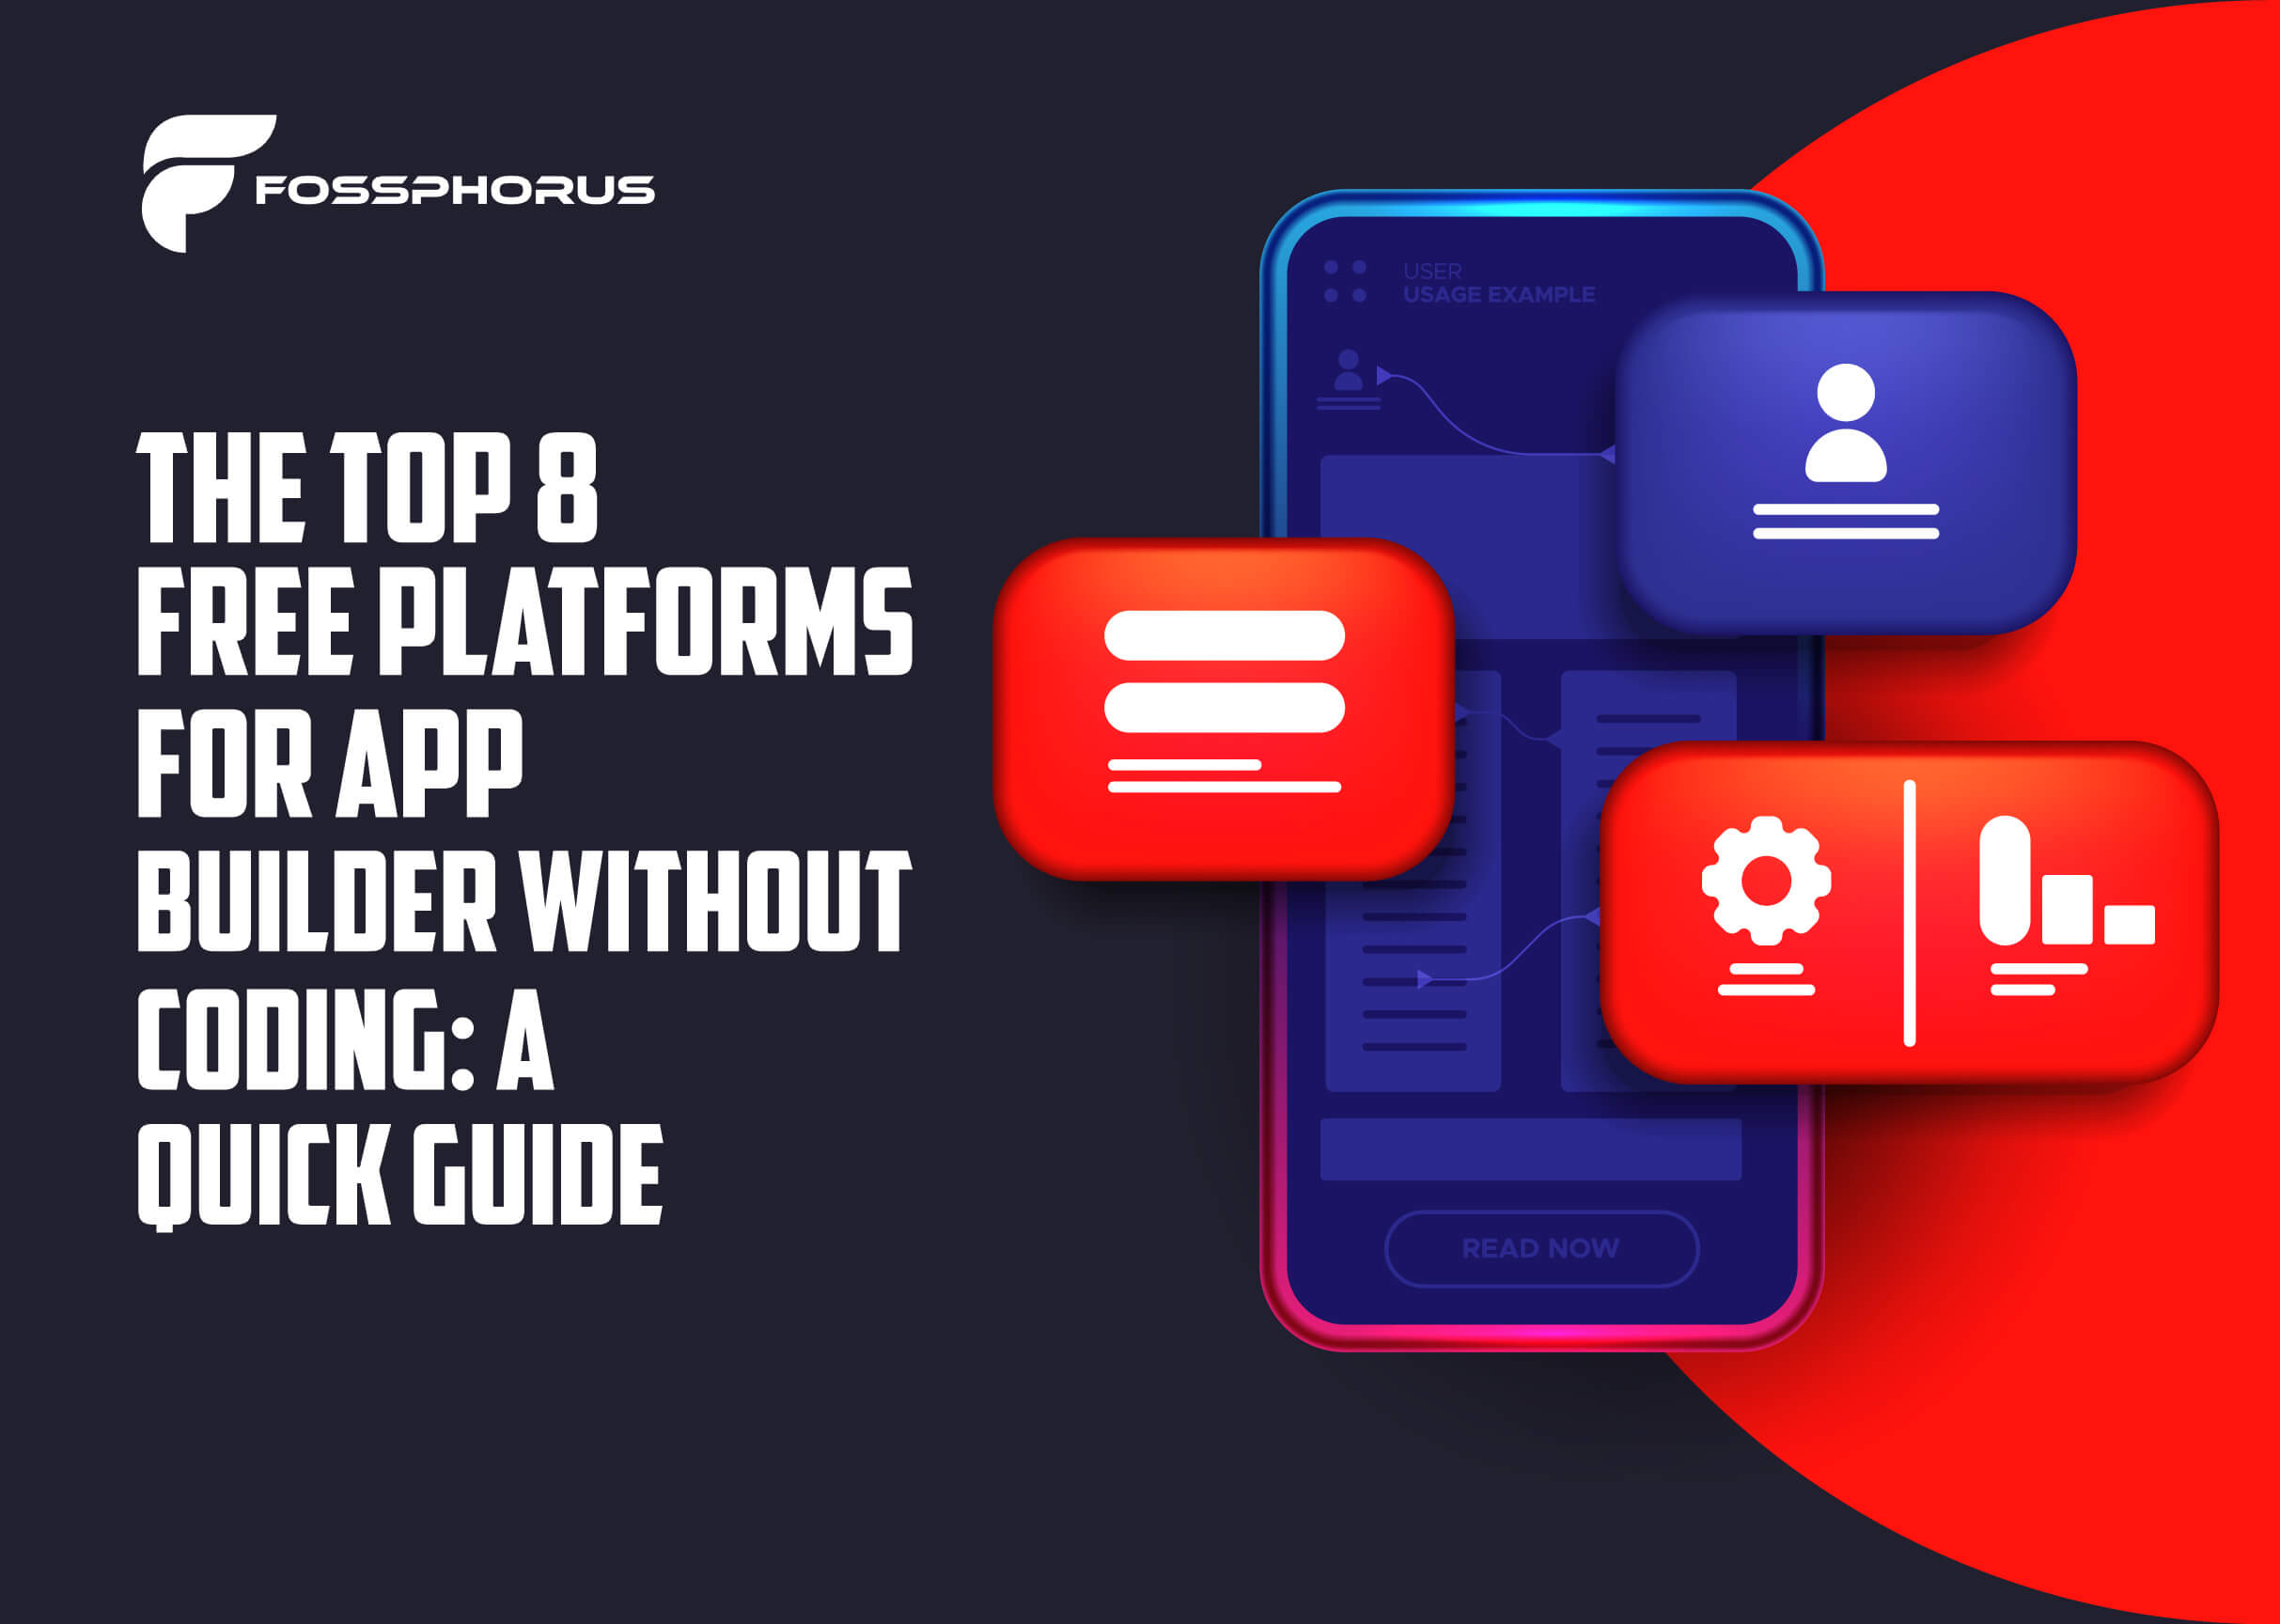 The-Top-8-Free-Platforms-for-App-Builder-without-Coding-A-Quick-Guide